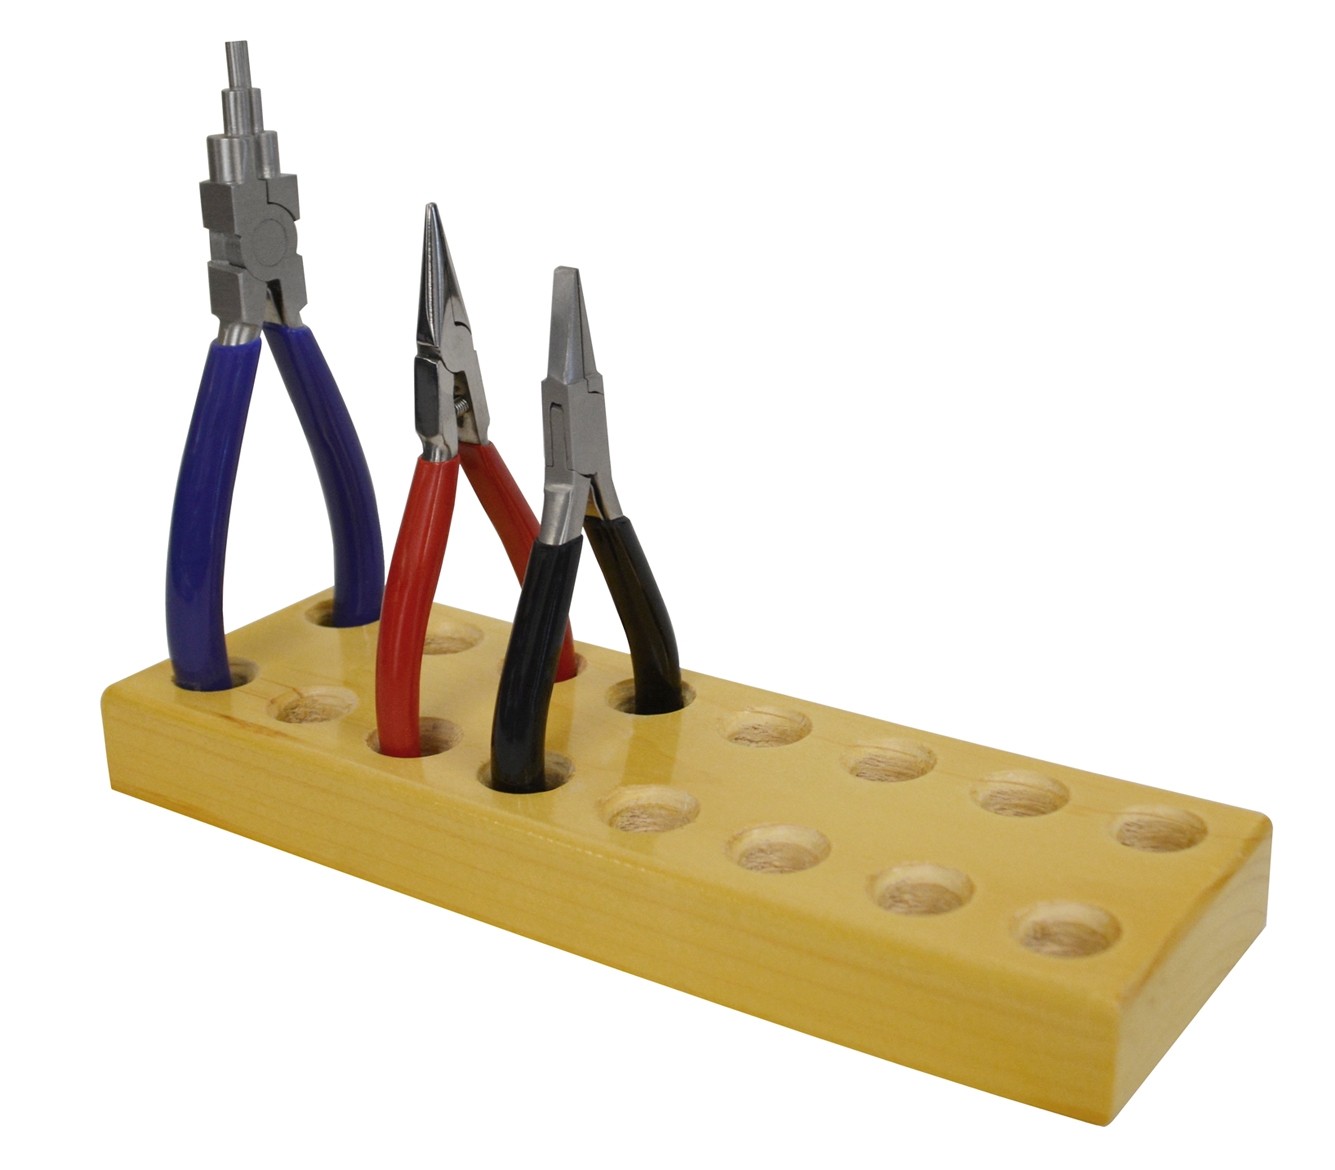 Solid Wood Plier Rack and Holder for 8 Pliers, STRG-0072